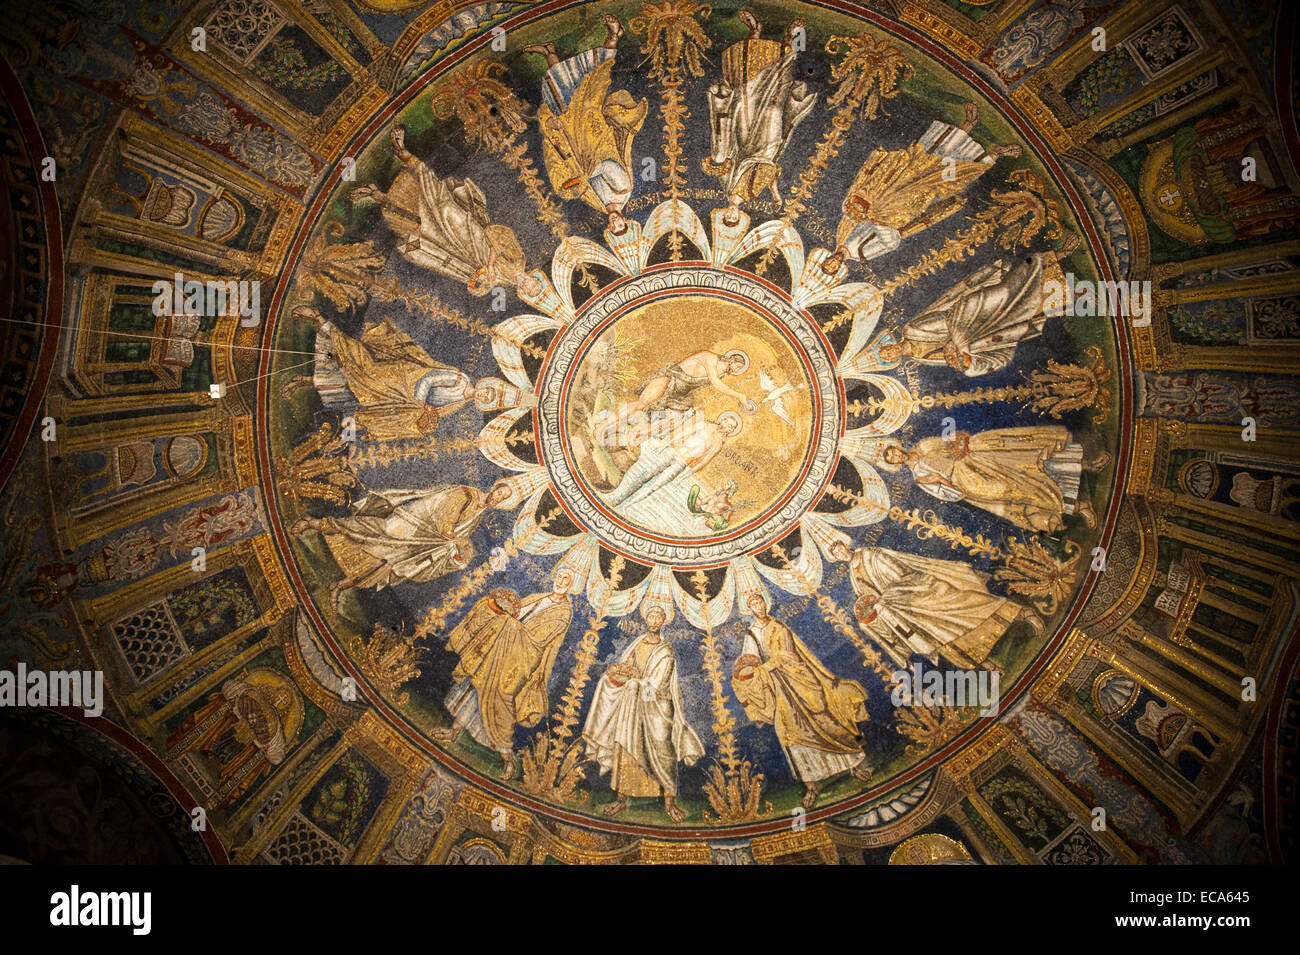 Ceiling mosaic in the Baptistry of the Cathedral of Ravenna, Ravenna, Emilia-Romagna, Italy Stock Photo